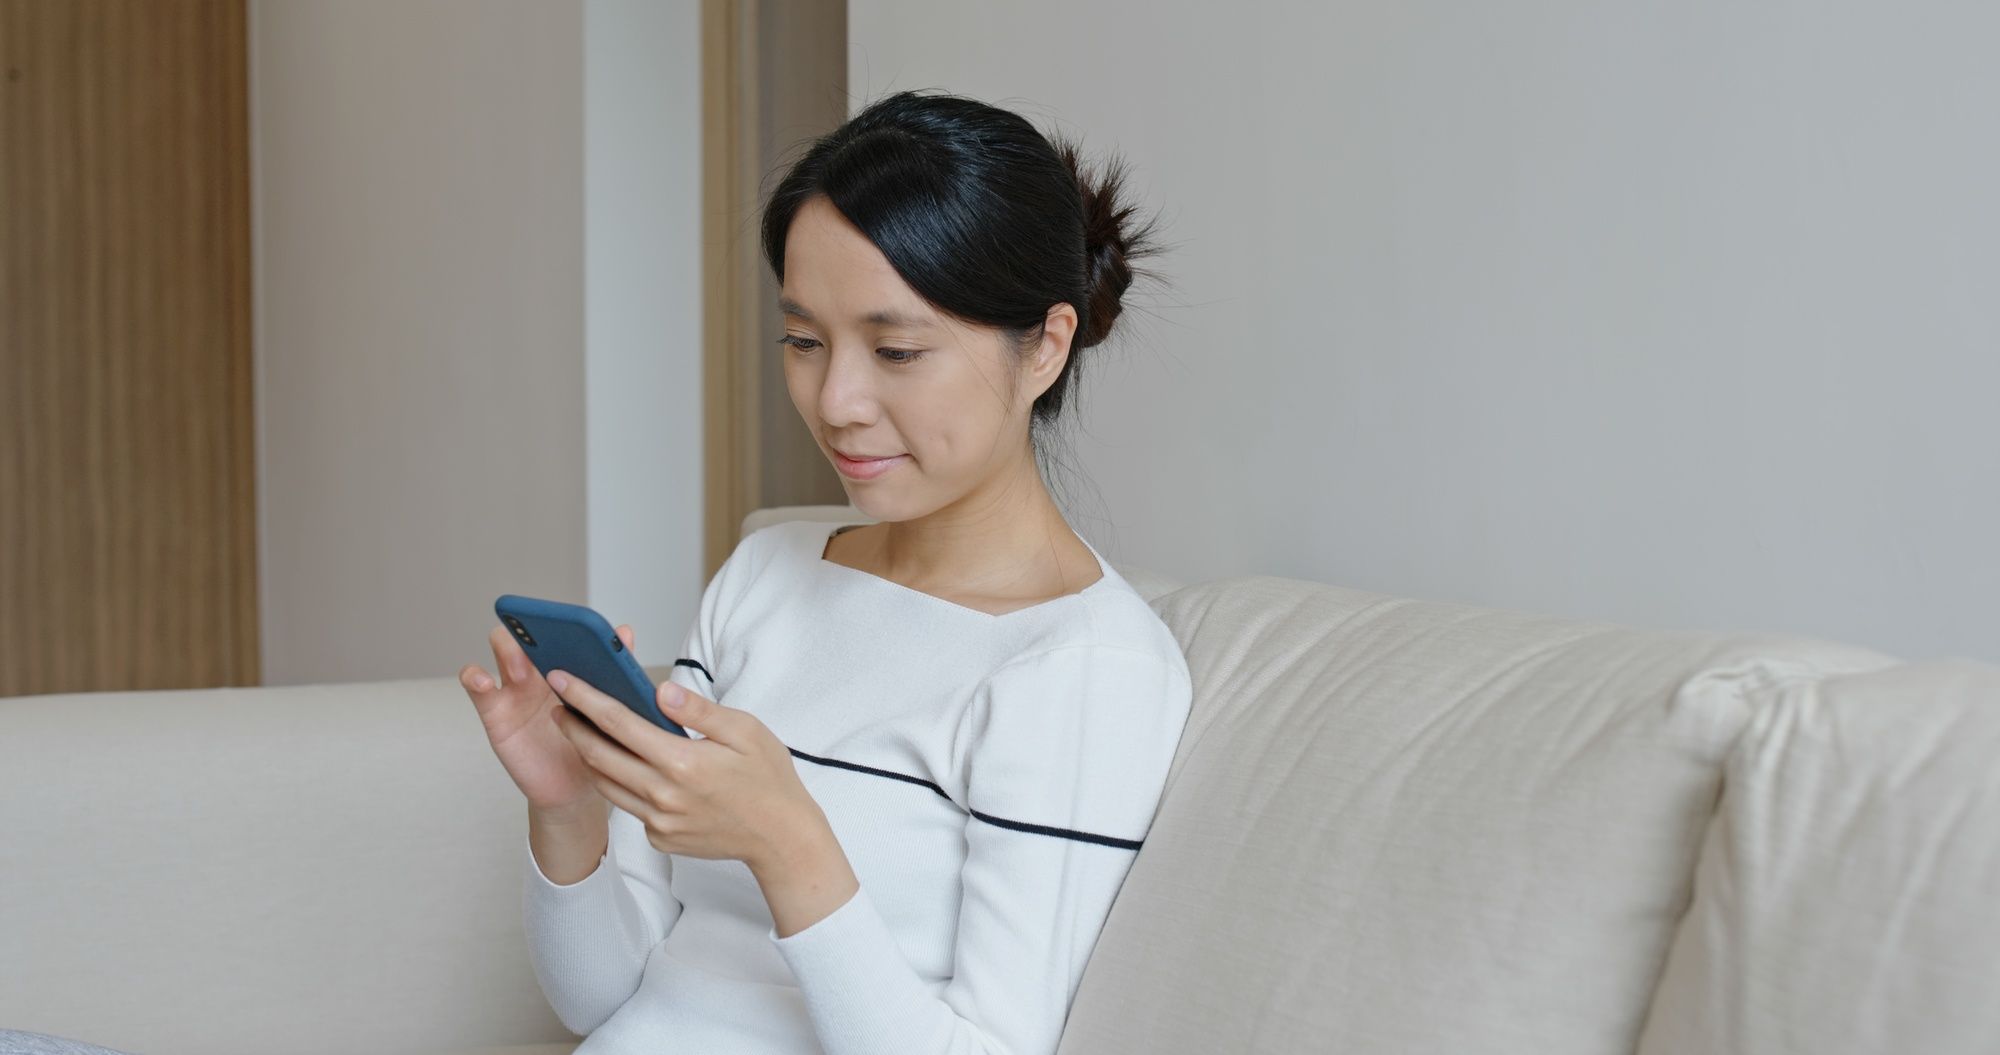 Woman sits on couch and reads texts on cell phone